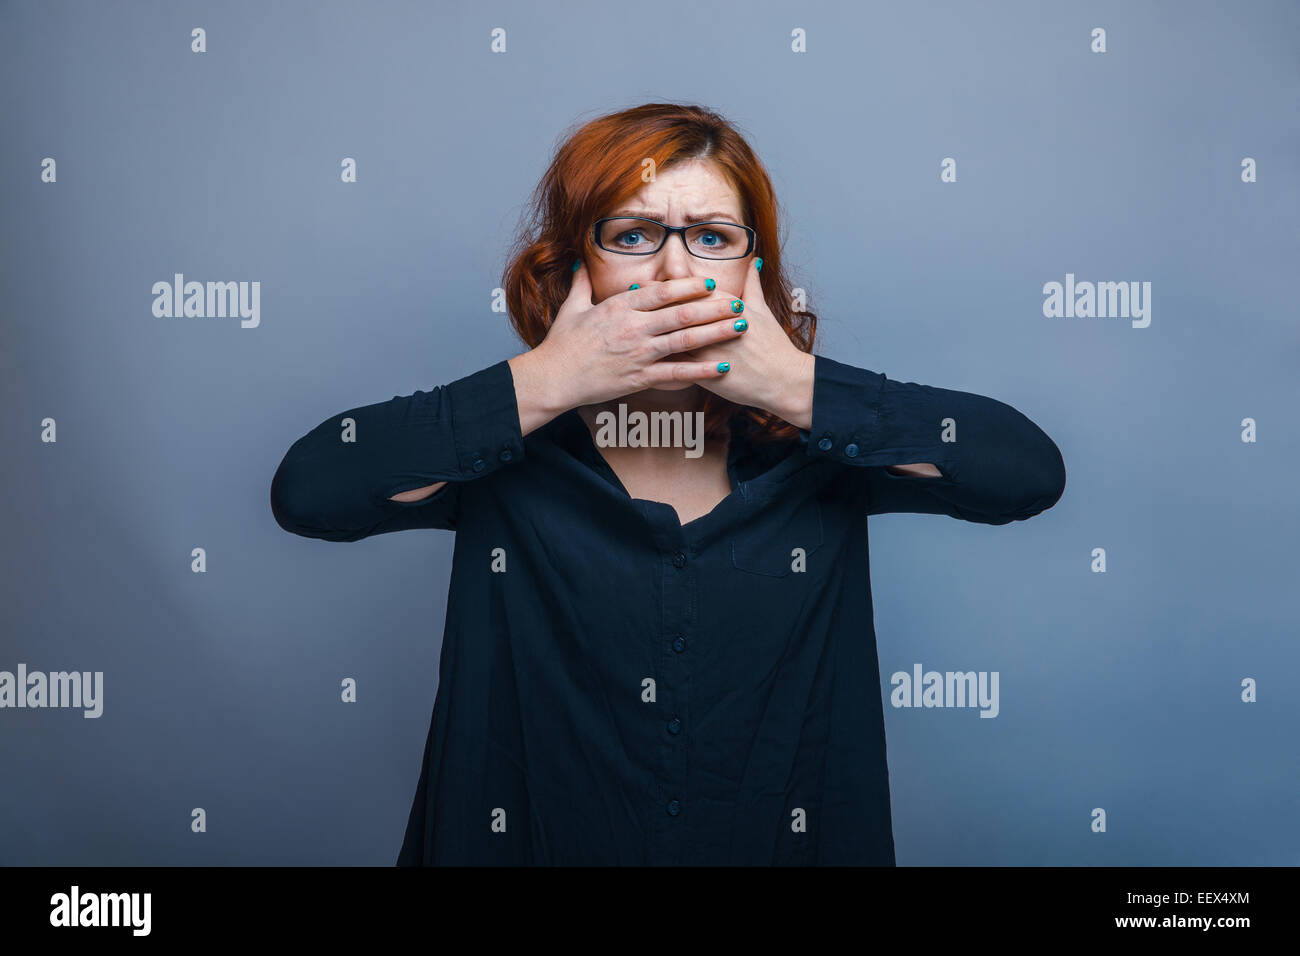 European-looking woman years his hands over mouth Stock Photo